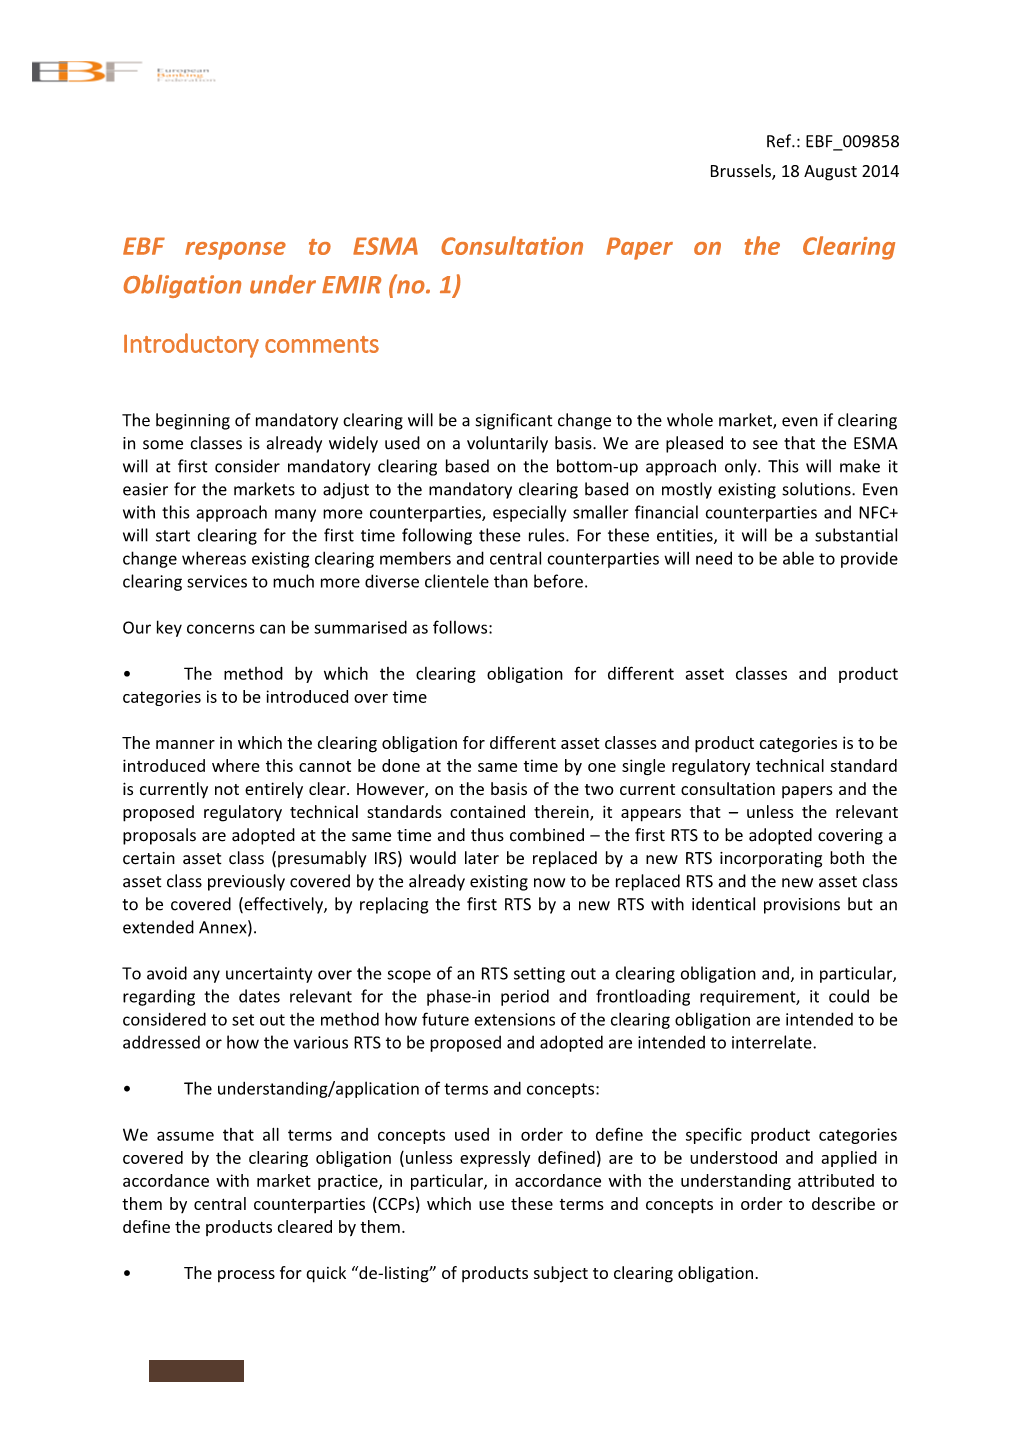 EBF Response to ESMA Consultation Paper on the Clearing Obligation Under EMIR (No. 1)